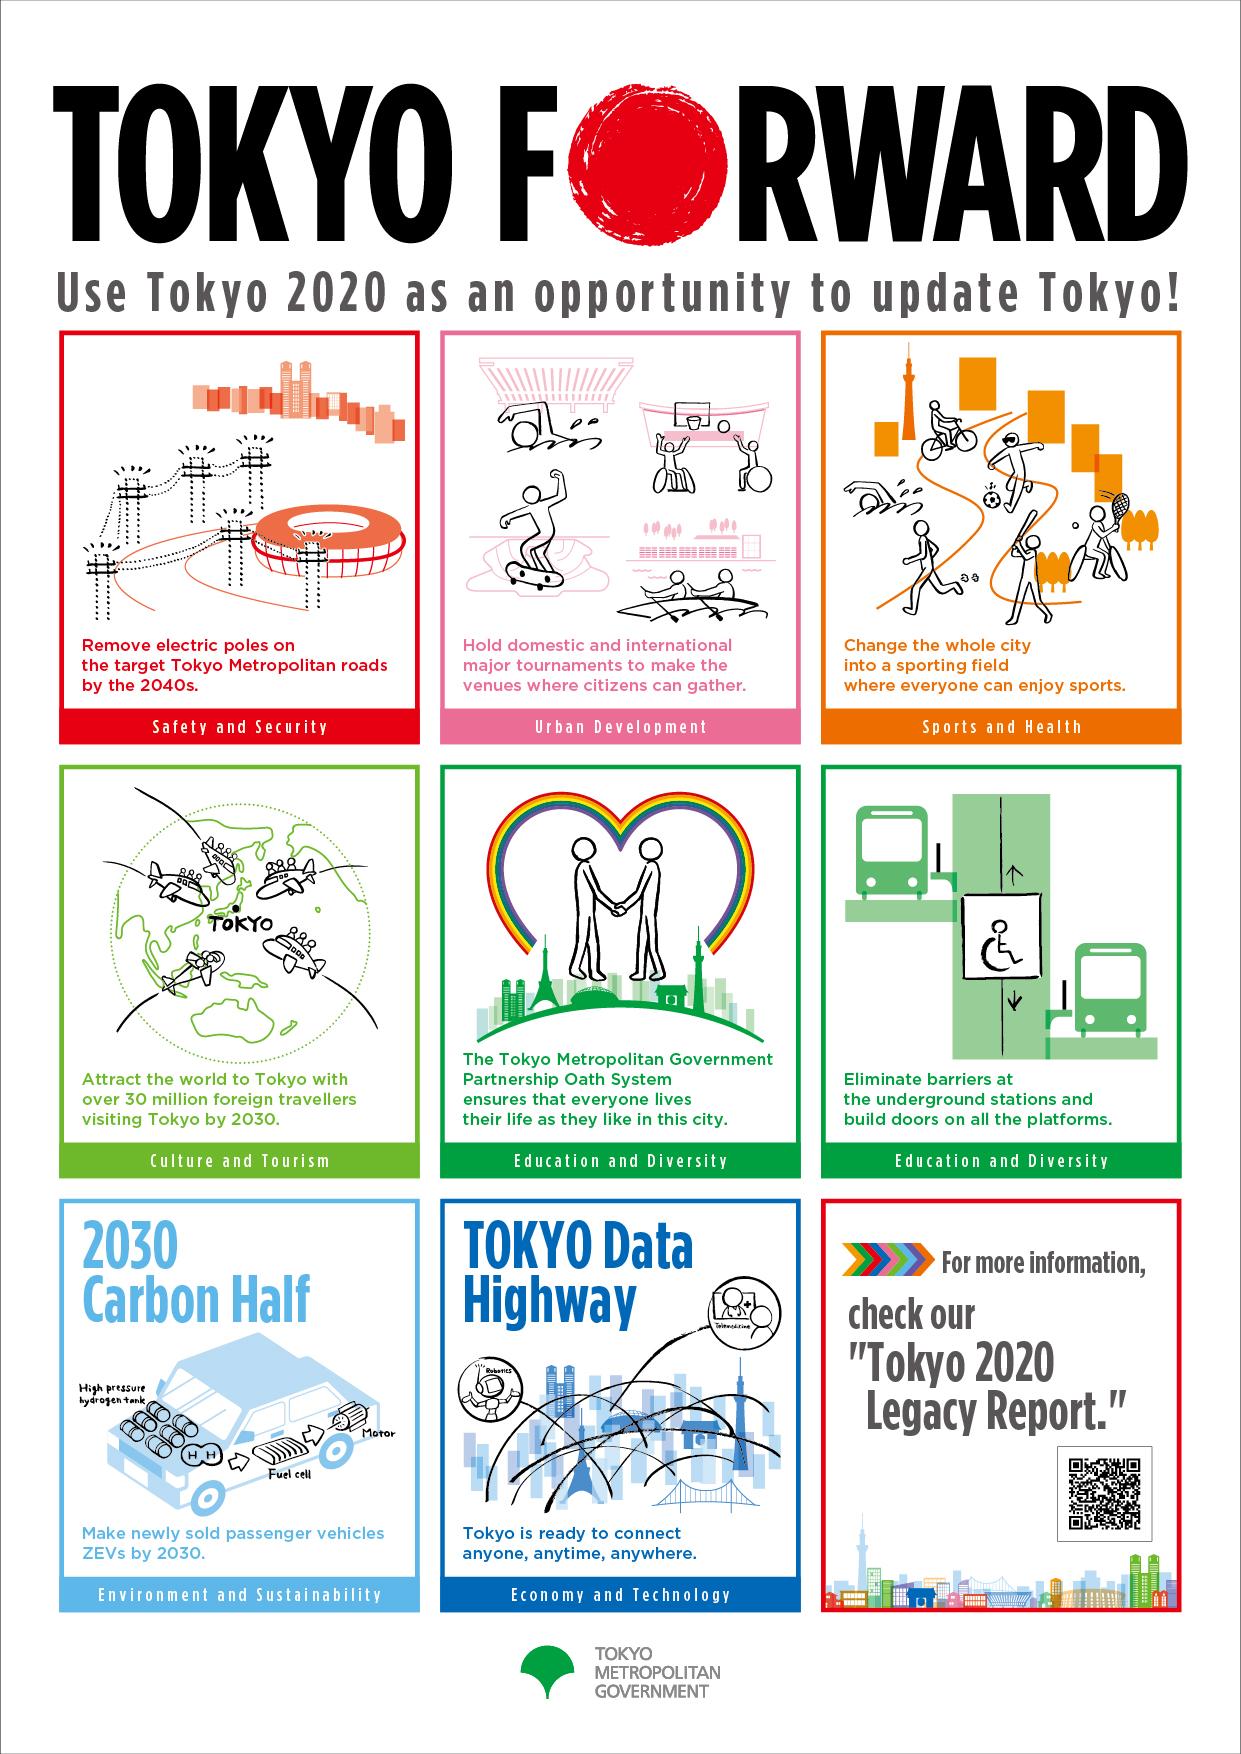 8 illustrations,removal of utility poles,competition venues, sports, tourism,partnerships, doors on platform,zero-emission vehicles,TOKYO data highway